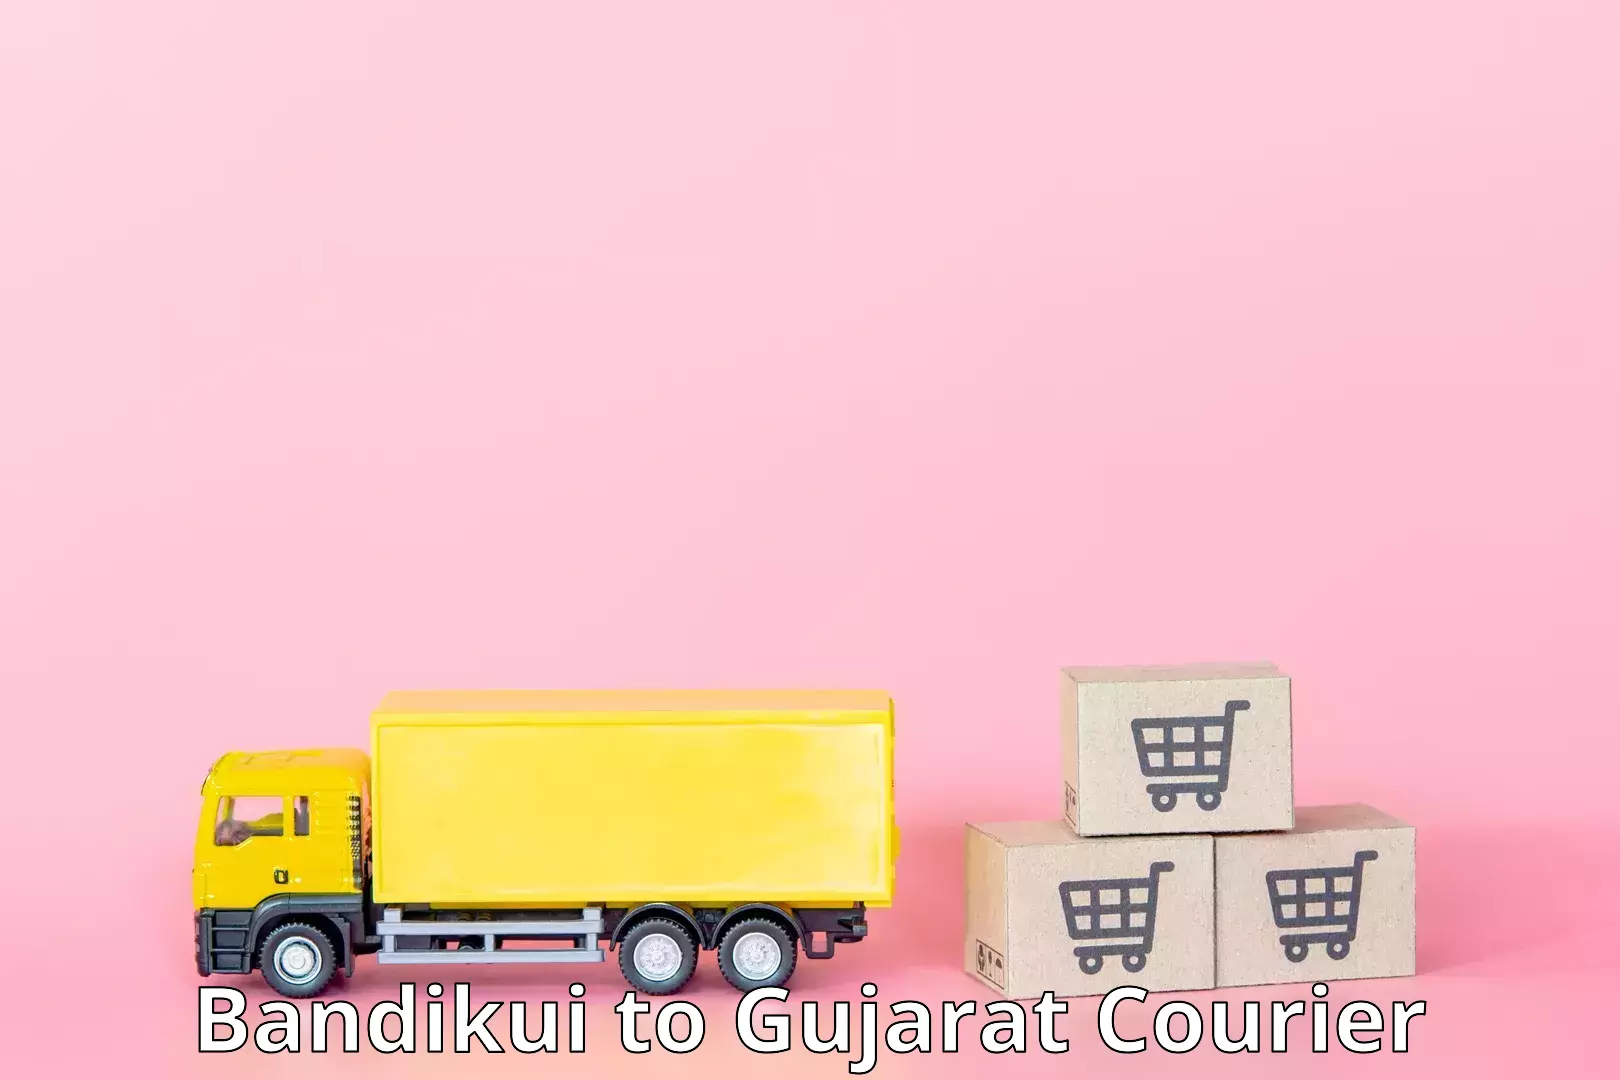 State-of-the-art courier technology Bandikui to Gujarat